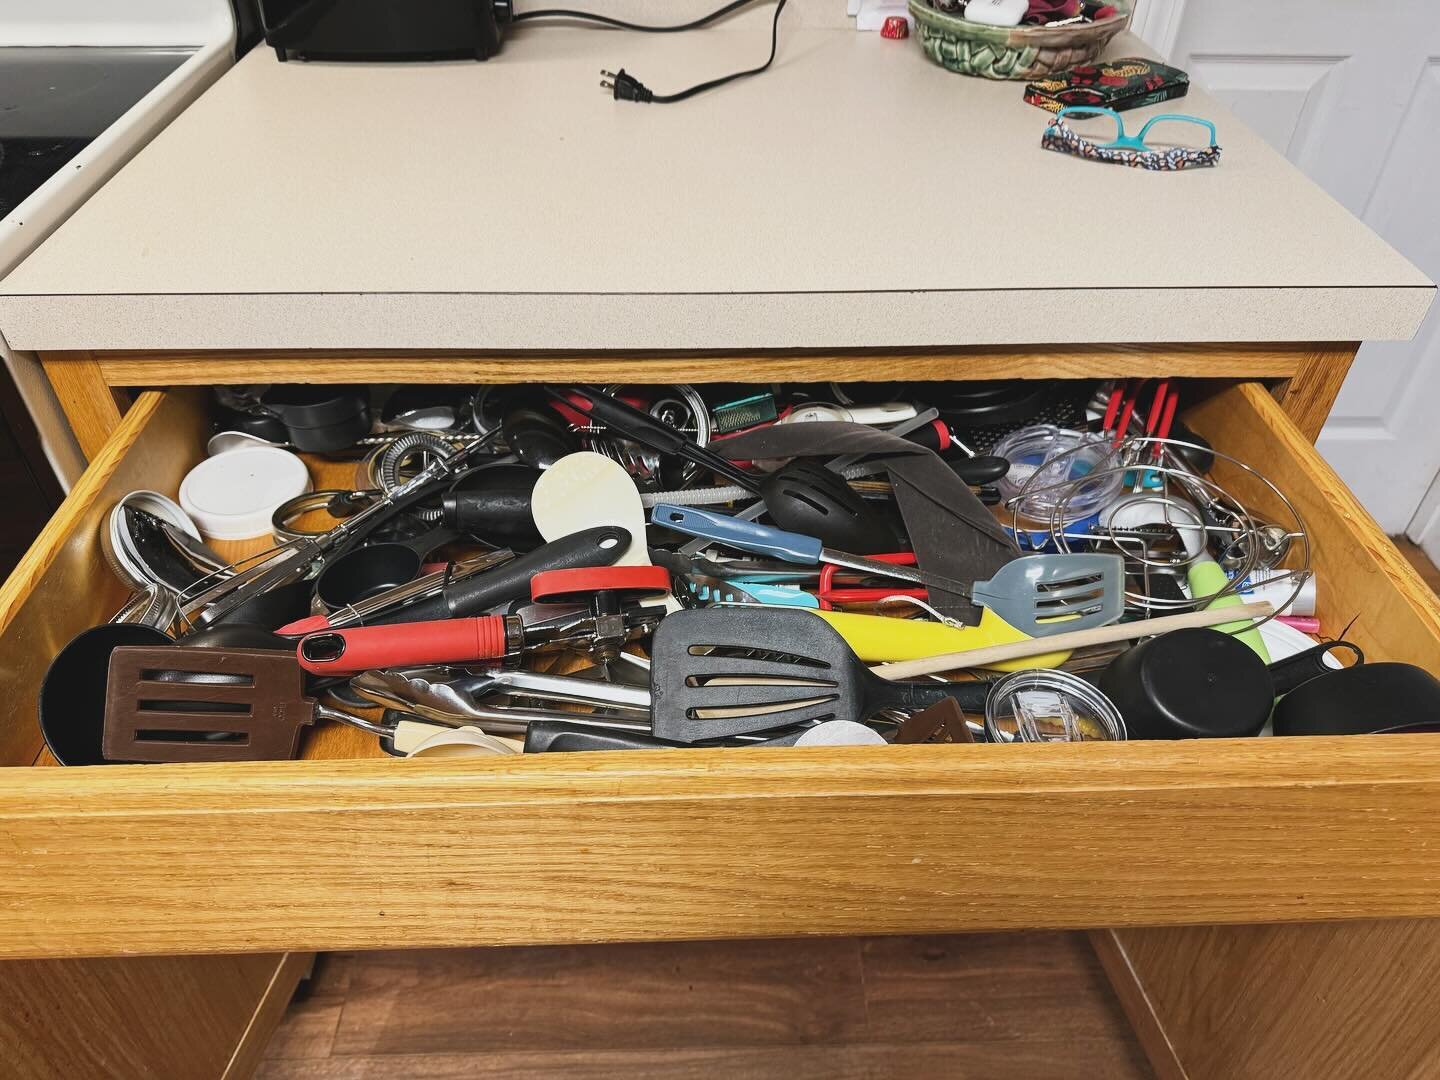 CATCH ALLS ➡️ SWIPE FOR AFTER 

We&rsquo;ve all been there rummaging through that one drawer that just holds ALLL the things. Or trying to get to that one big pot shoved to the back. 

Cue organizational systems that take a simple grouping approach a